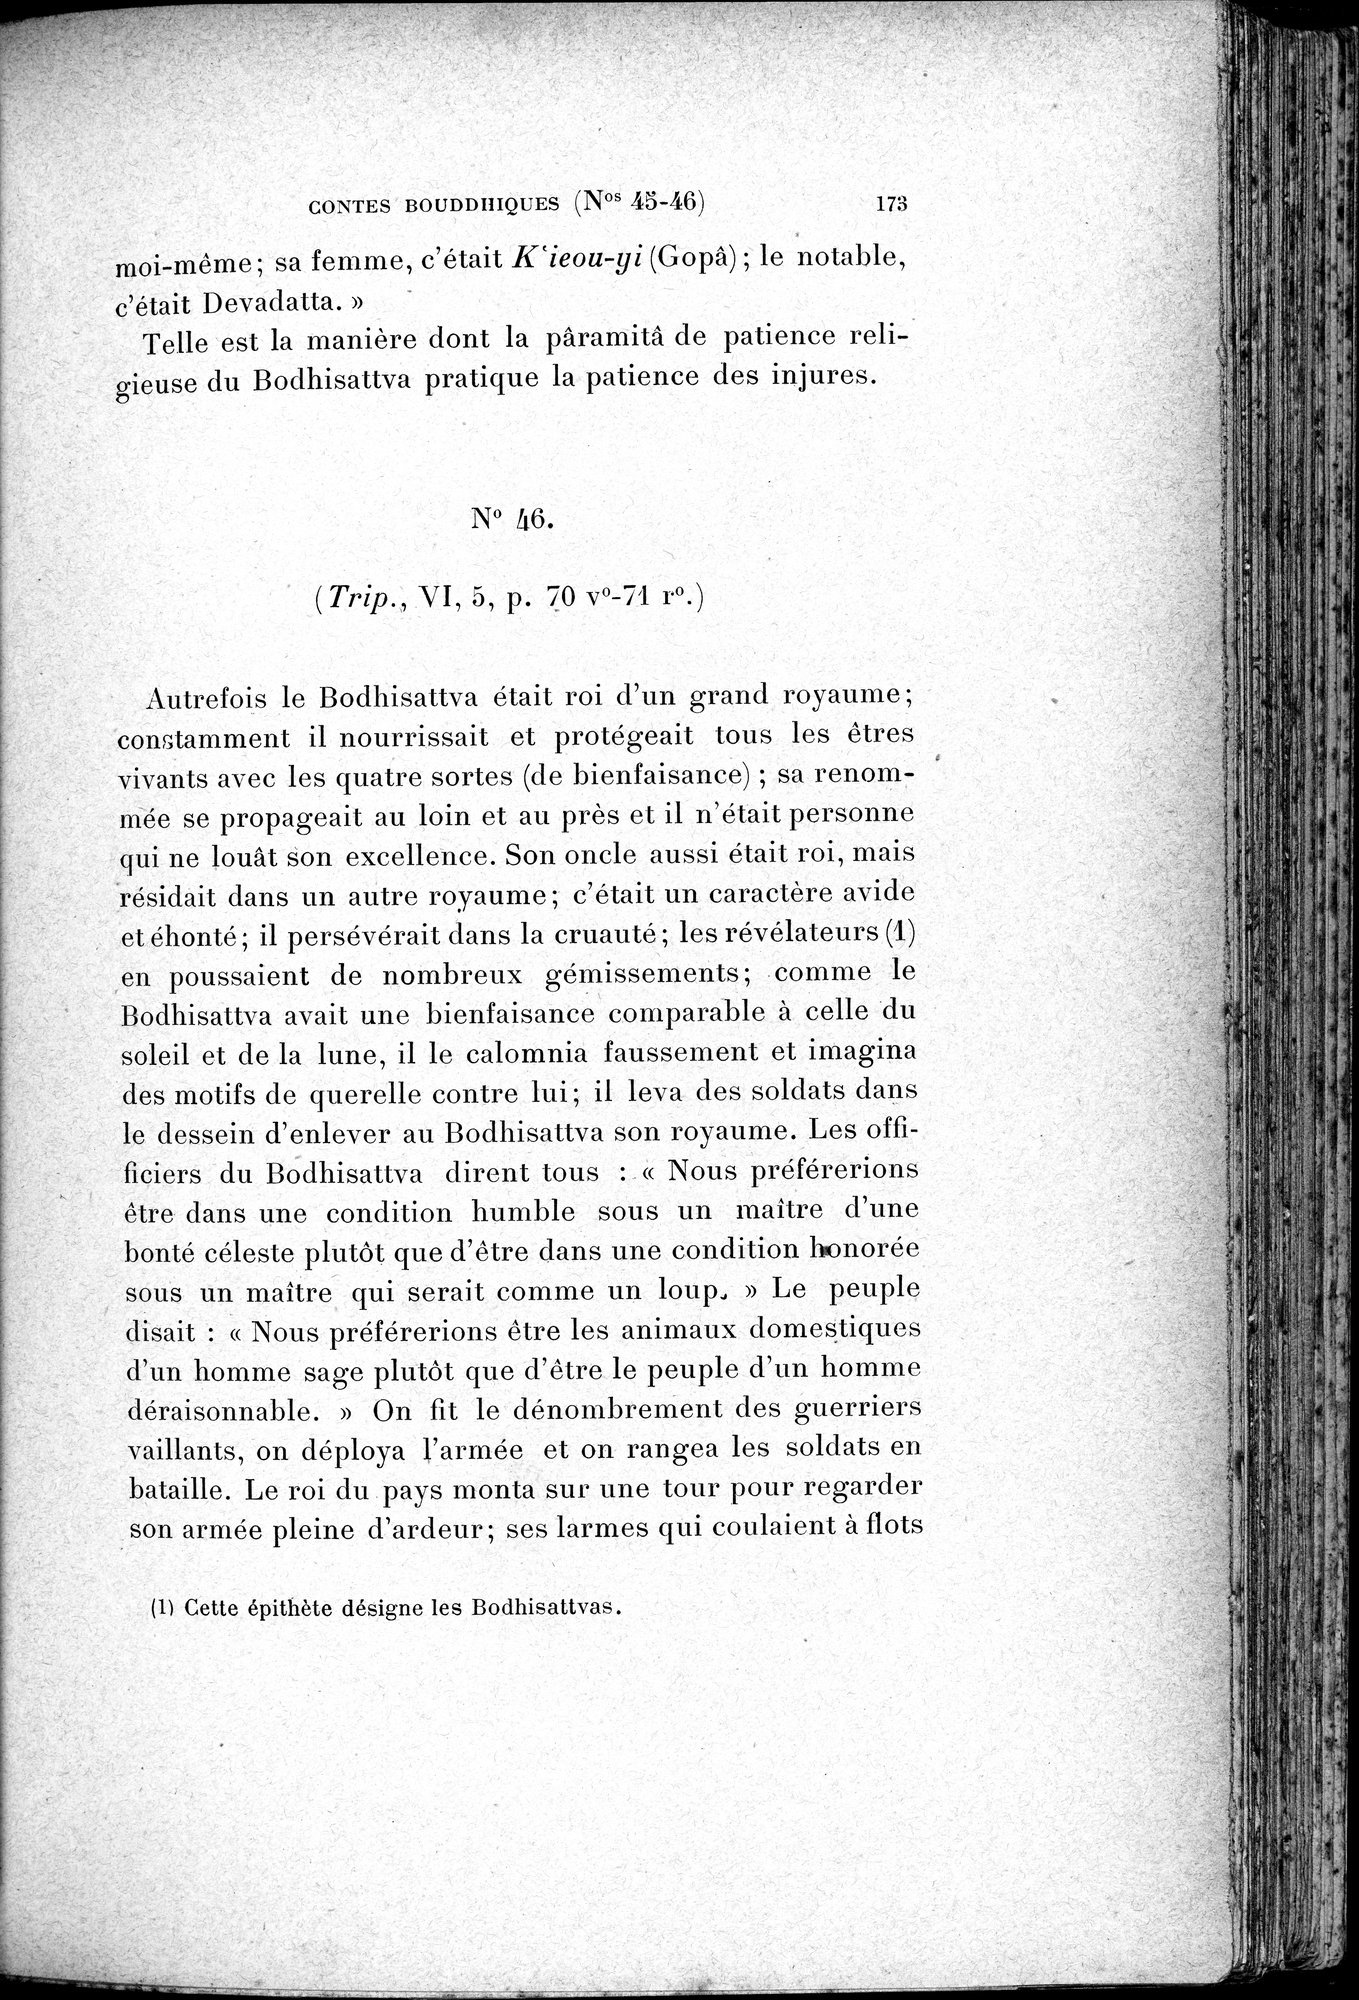 Cinq Cents Contes et Apologues : vol.1 / Page 207 (Grayscale High Resolution Image)